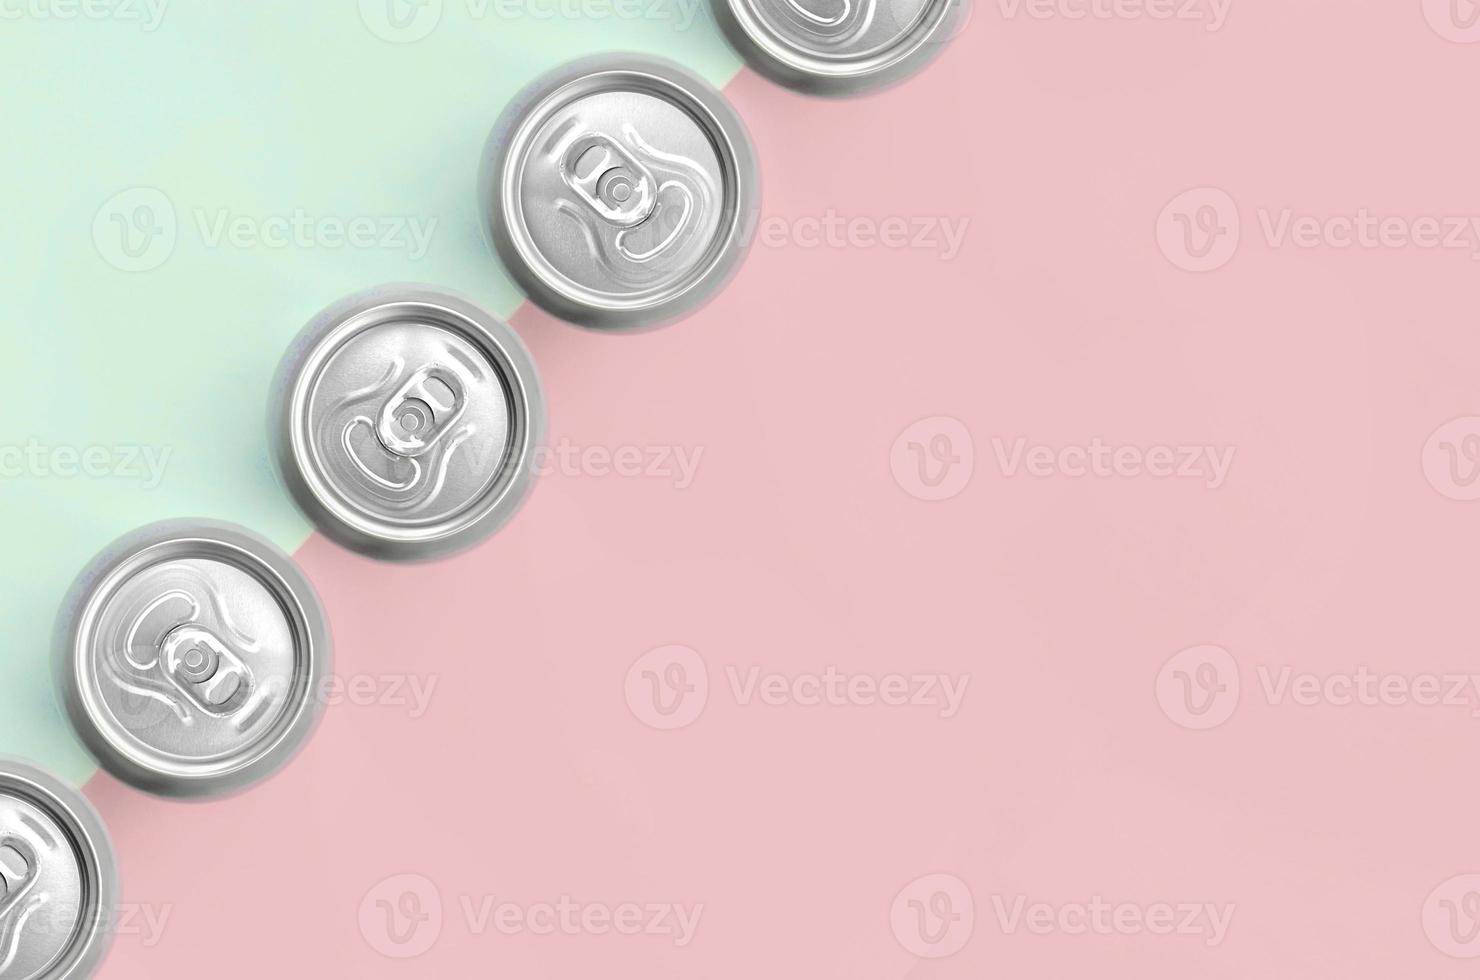 Many metallic beer cans on texture background of fashion pastel turquoise and pink colors photo